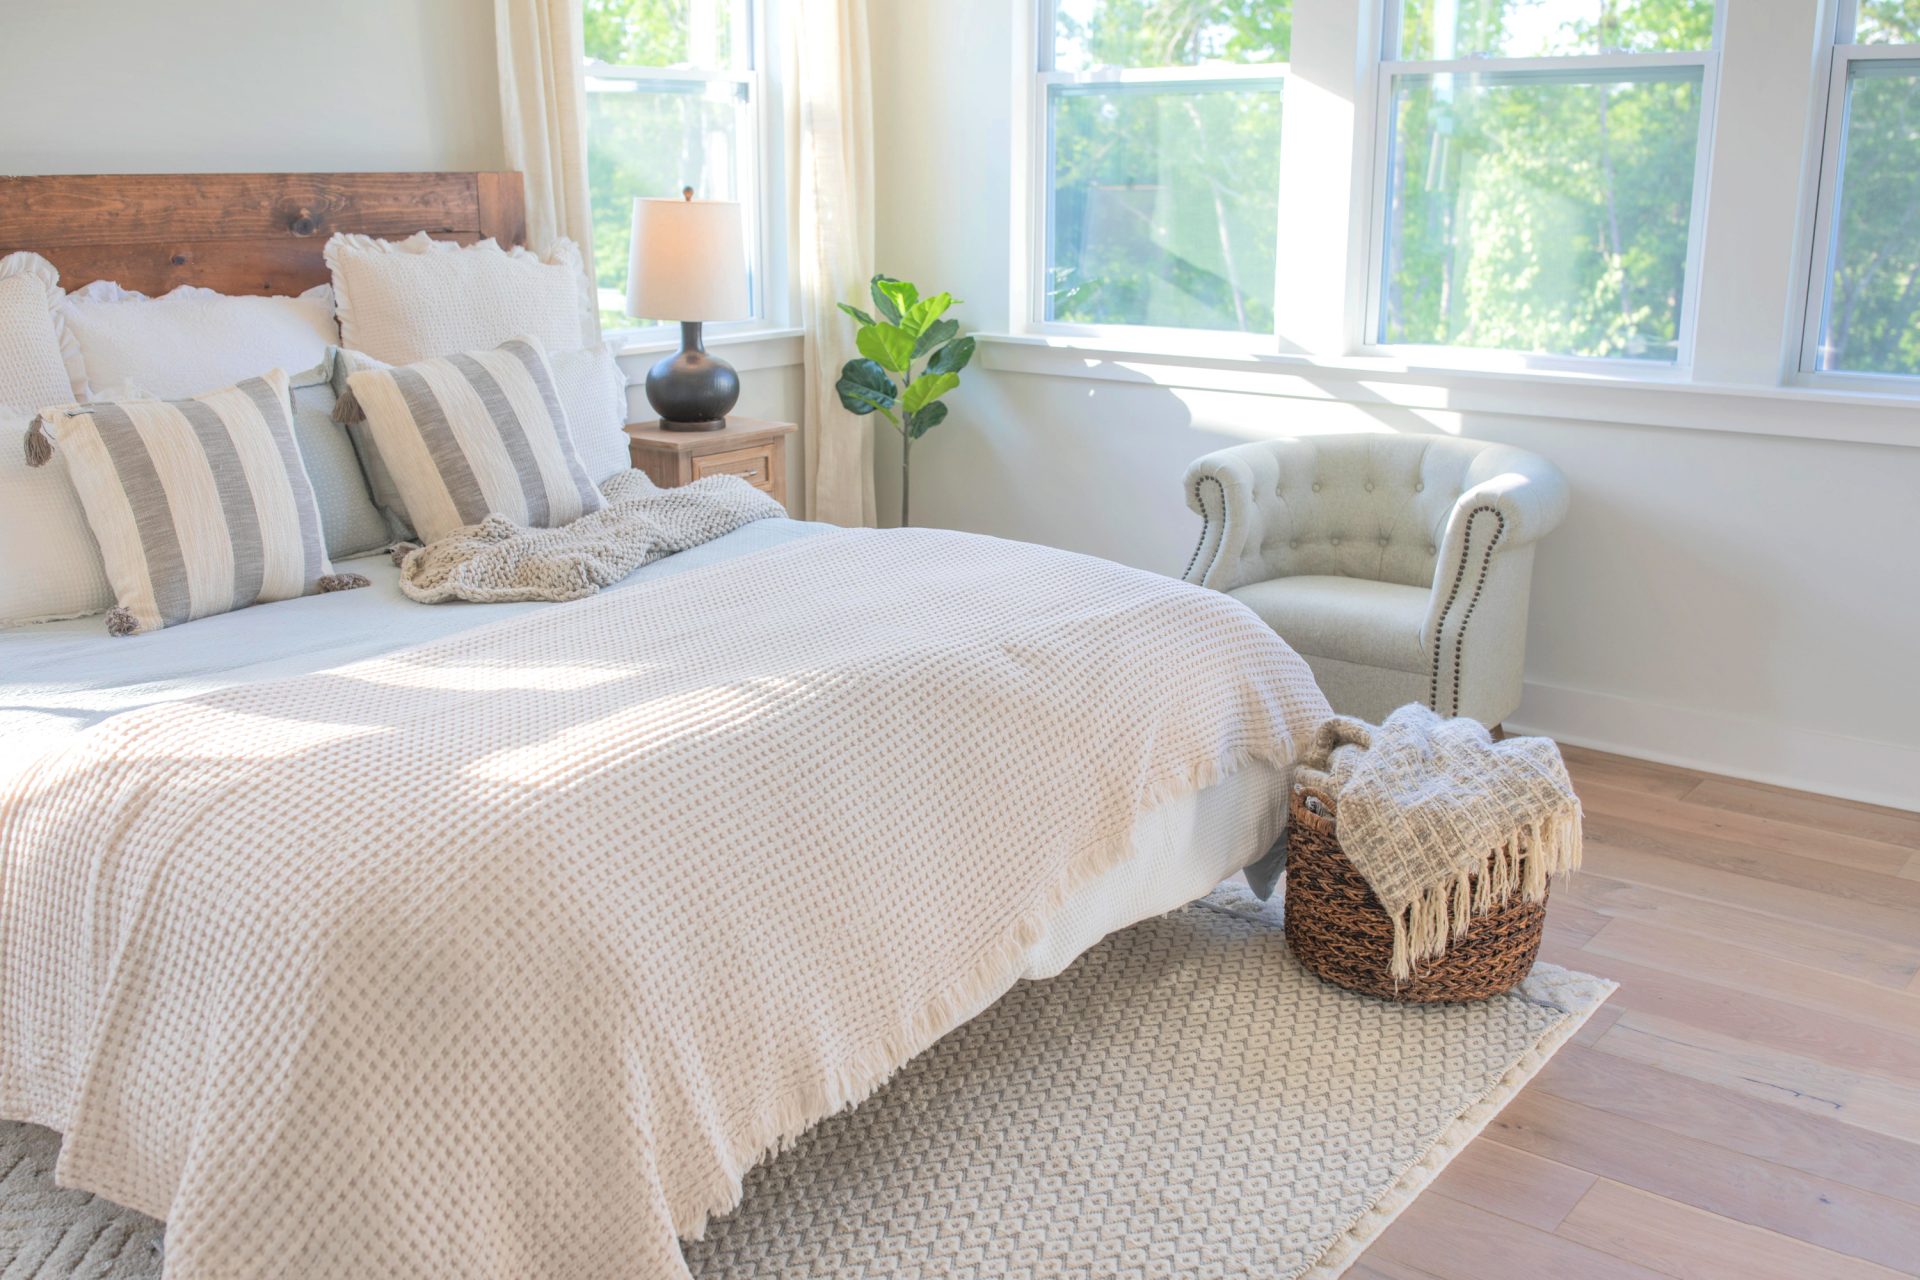 creamy bedroom, master bedroom, cottage, drapes, bedding, cozy bedroom, quilt, ivory bed, ivory quilt bedroom, master bedroom decor, neutral colors, target, HomeGoods, hobby lobby, bedding, hardwood floors, end tables, black curtain rods, linen drapes